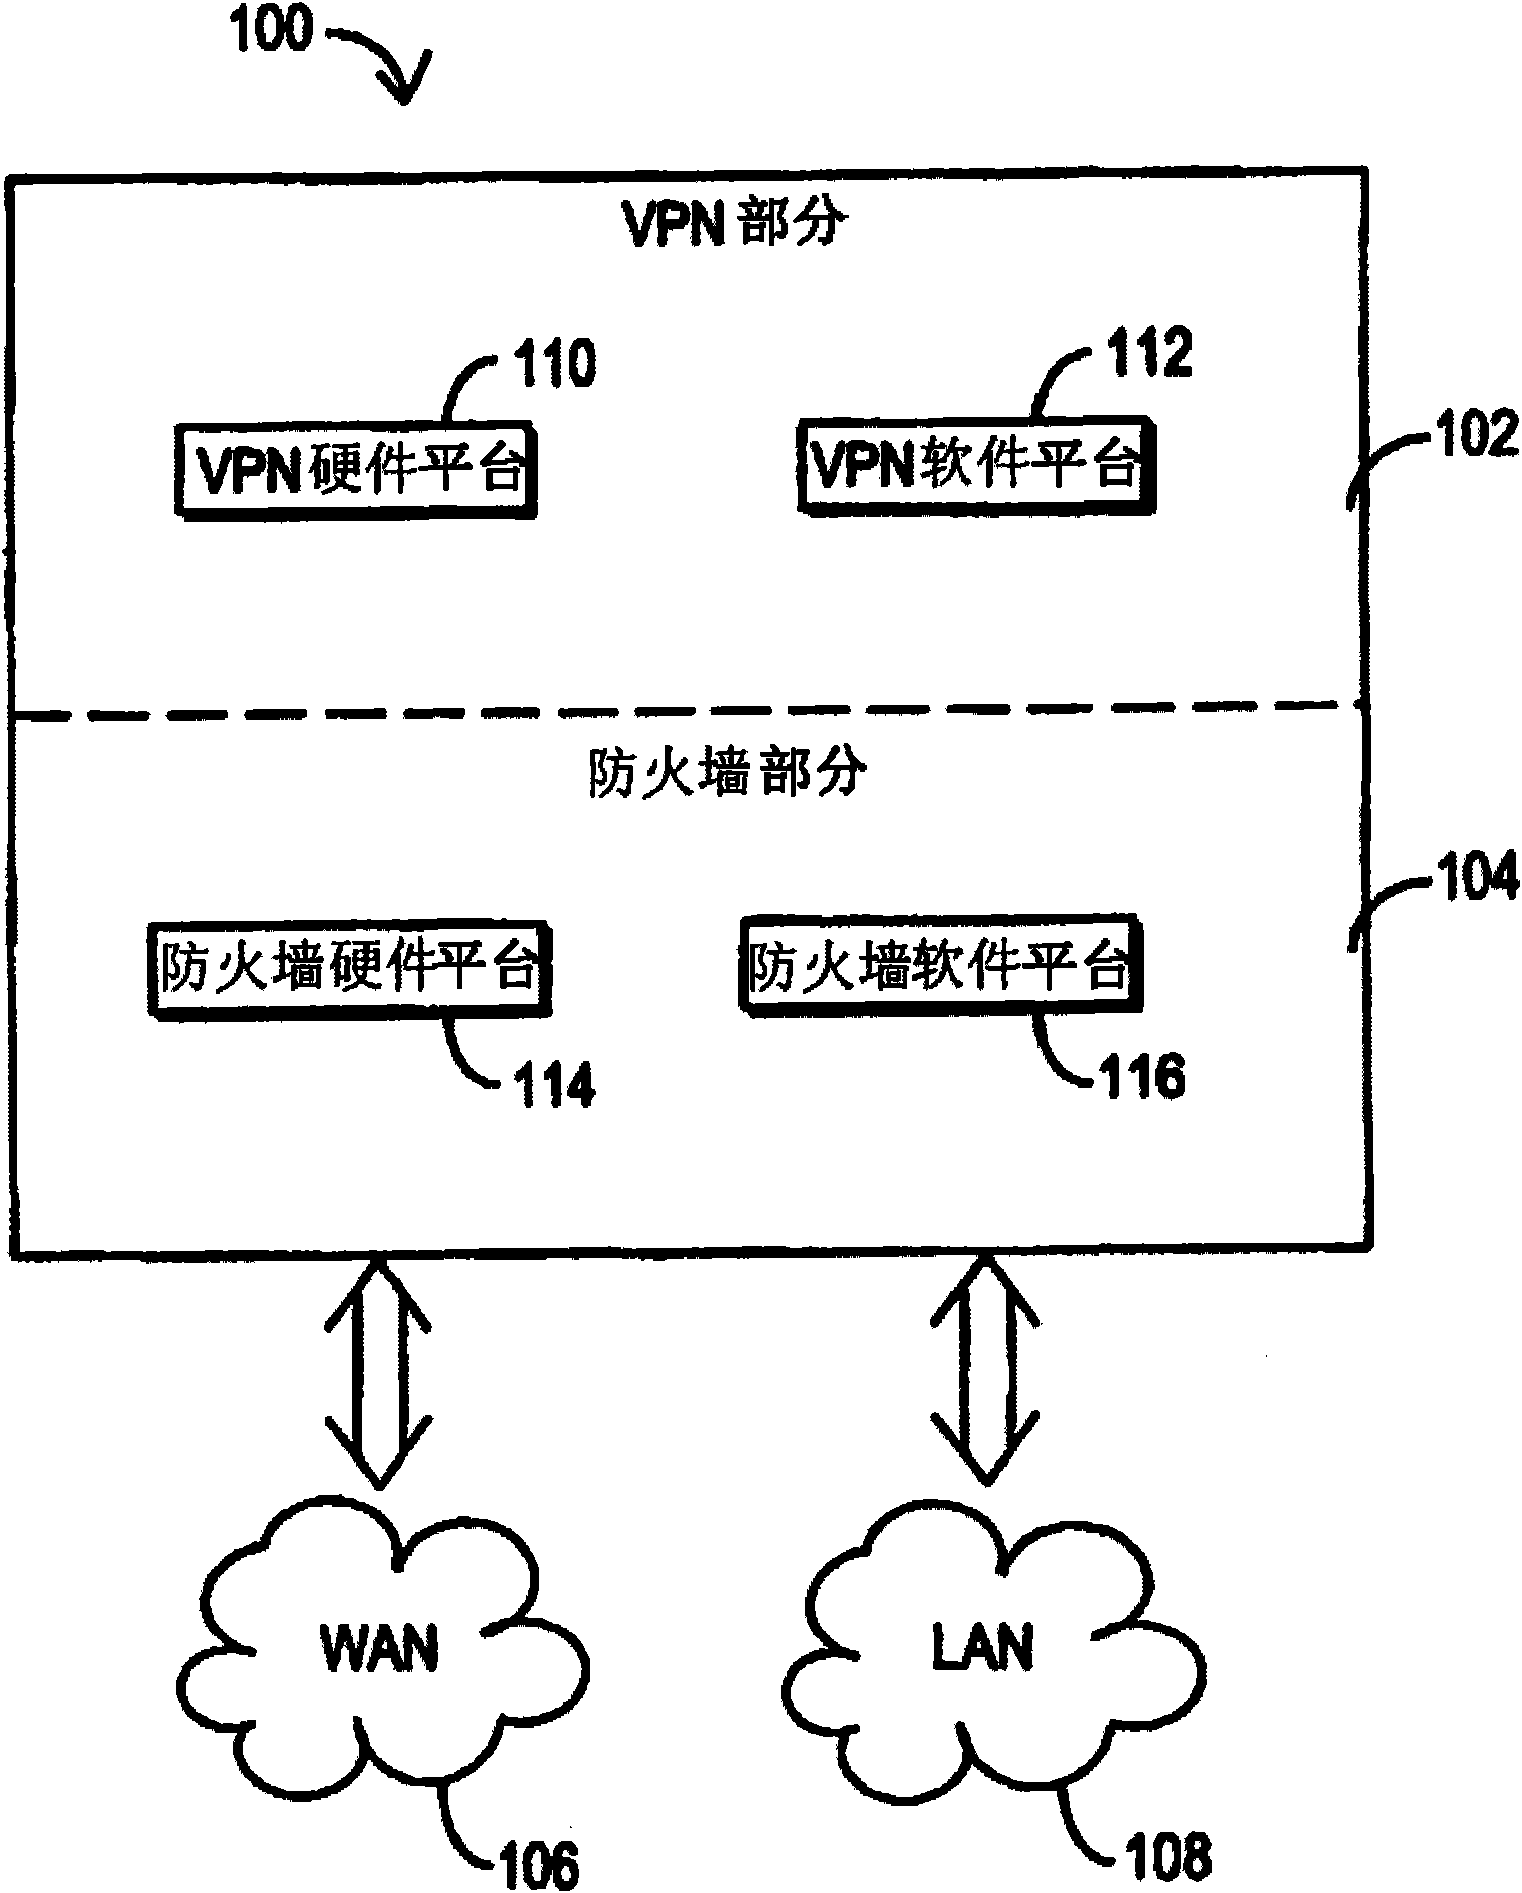 Firewall / virtual private network integrated system and circuit